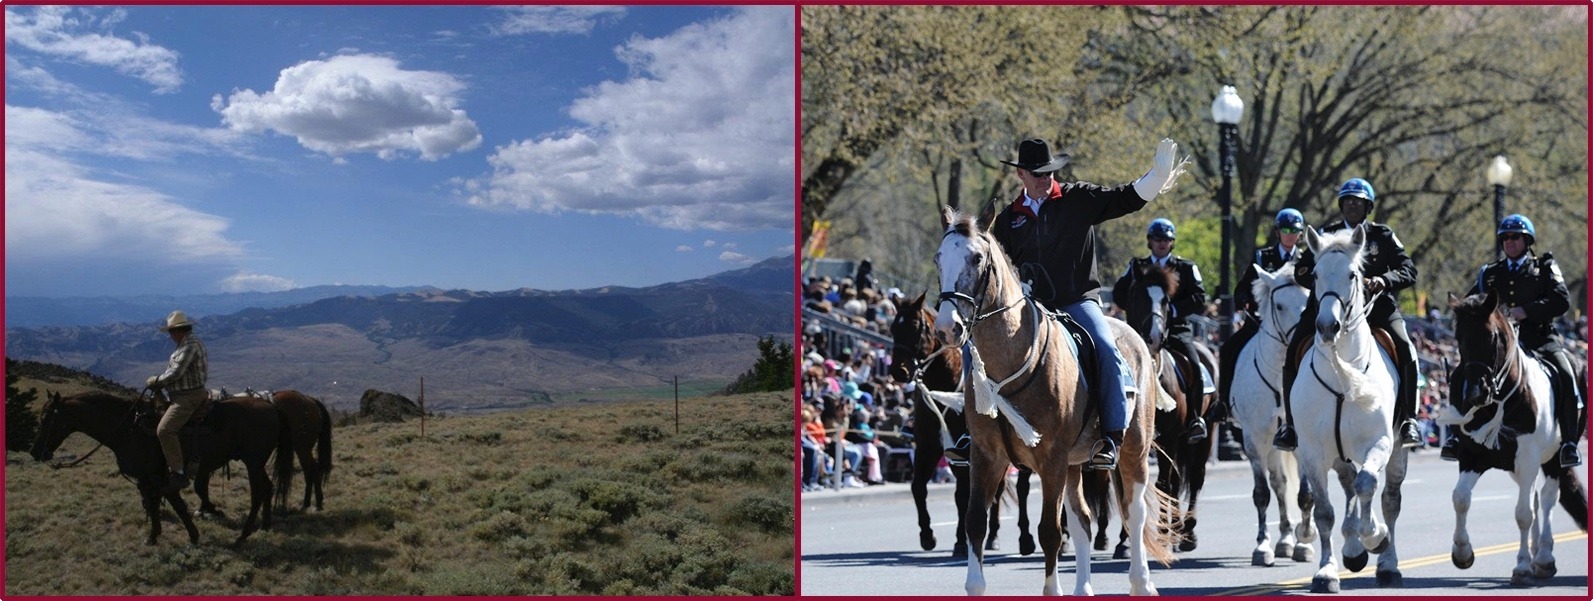 Two westerners on horseback. Who better reflects the spirit of conservationist Theodore Roosevelt? Barry Reiswig, left, is a retired civil servant, lifelong backcountry horseman, hunter and angler;  at right,  Interior Secretary Ryan Zinke, riding in the National Cherry Blossom Festival Parade in Washington, D.C.  Photo of Reiswig courtesy Wyoming Wilderness Association. Photo of Zinke courtesy of U.S. Department of Interior  (click to enlarge)